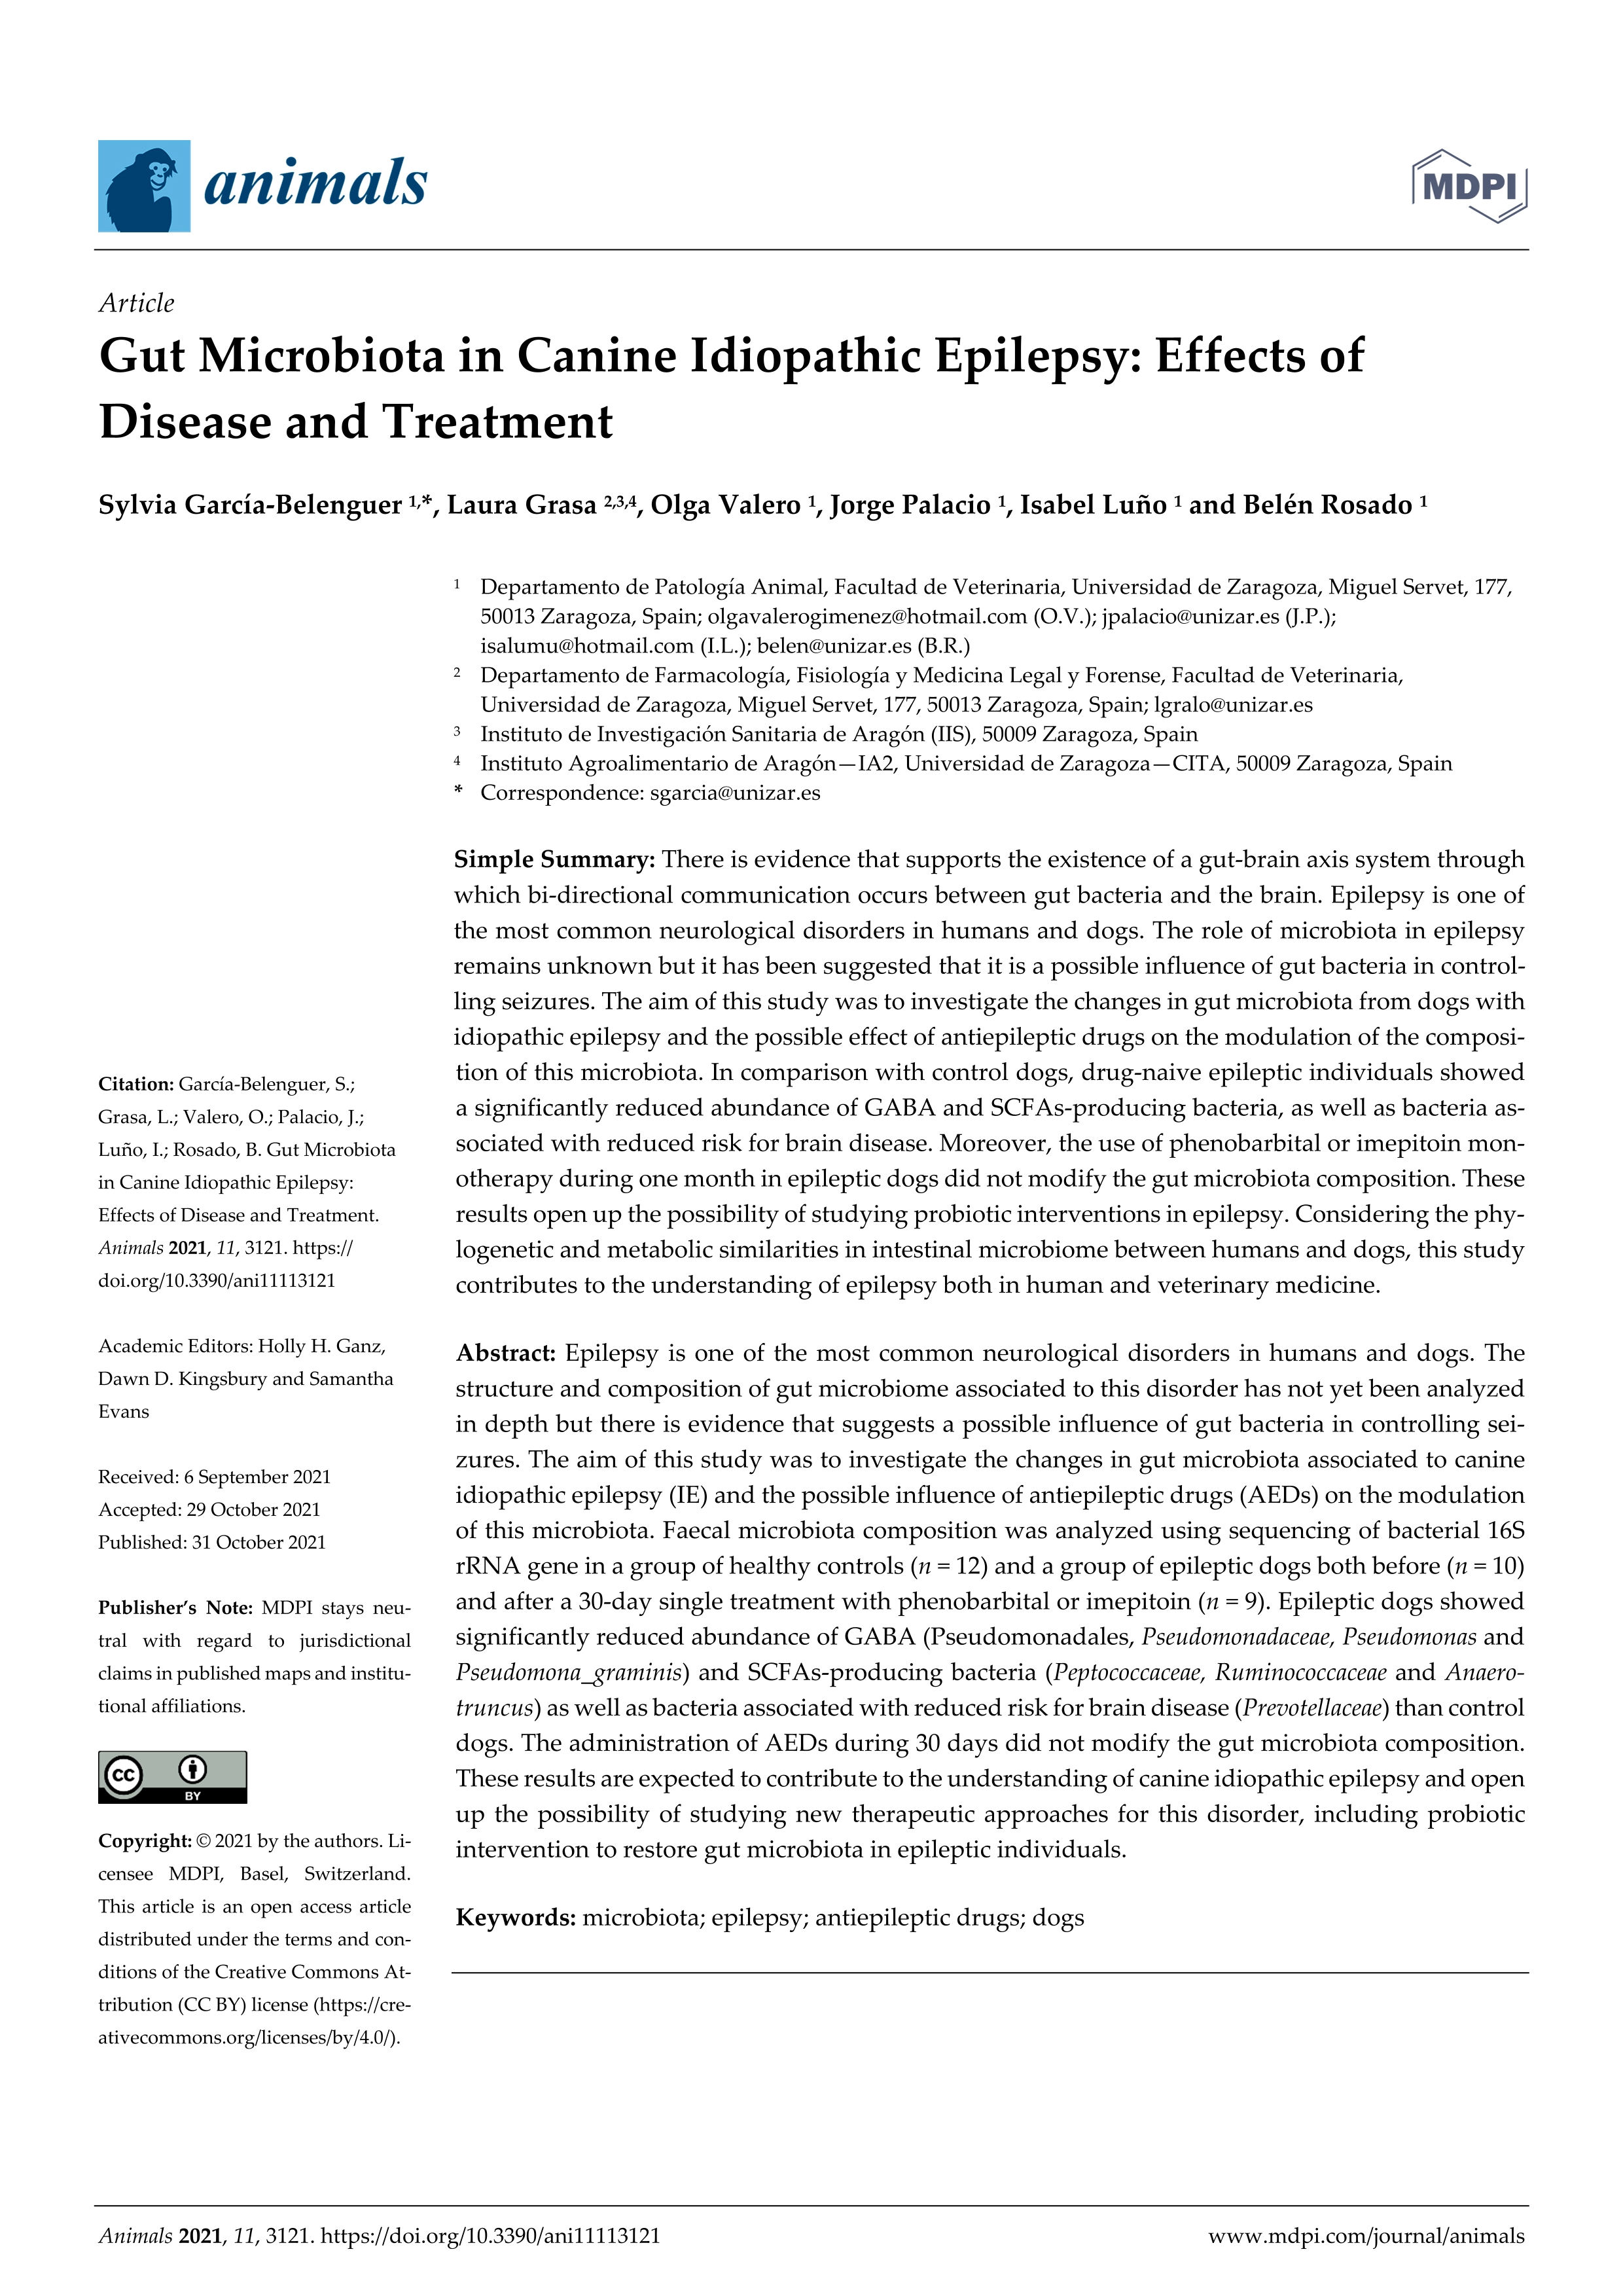 Gut microbiota in canine idiopathic epilepsy: Effects of disease and treatment